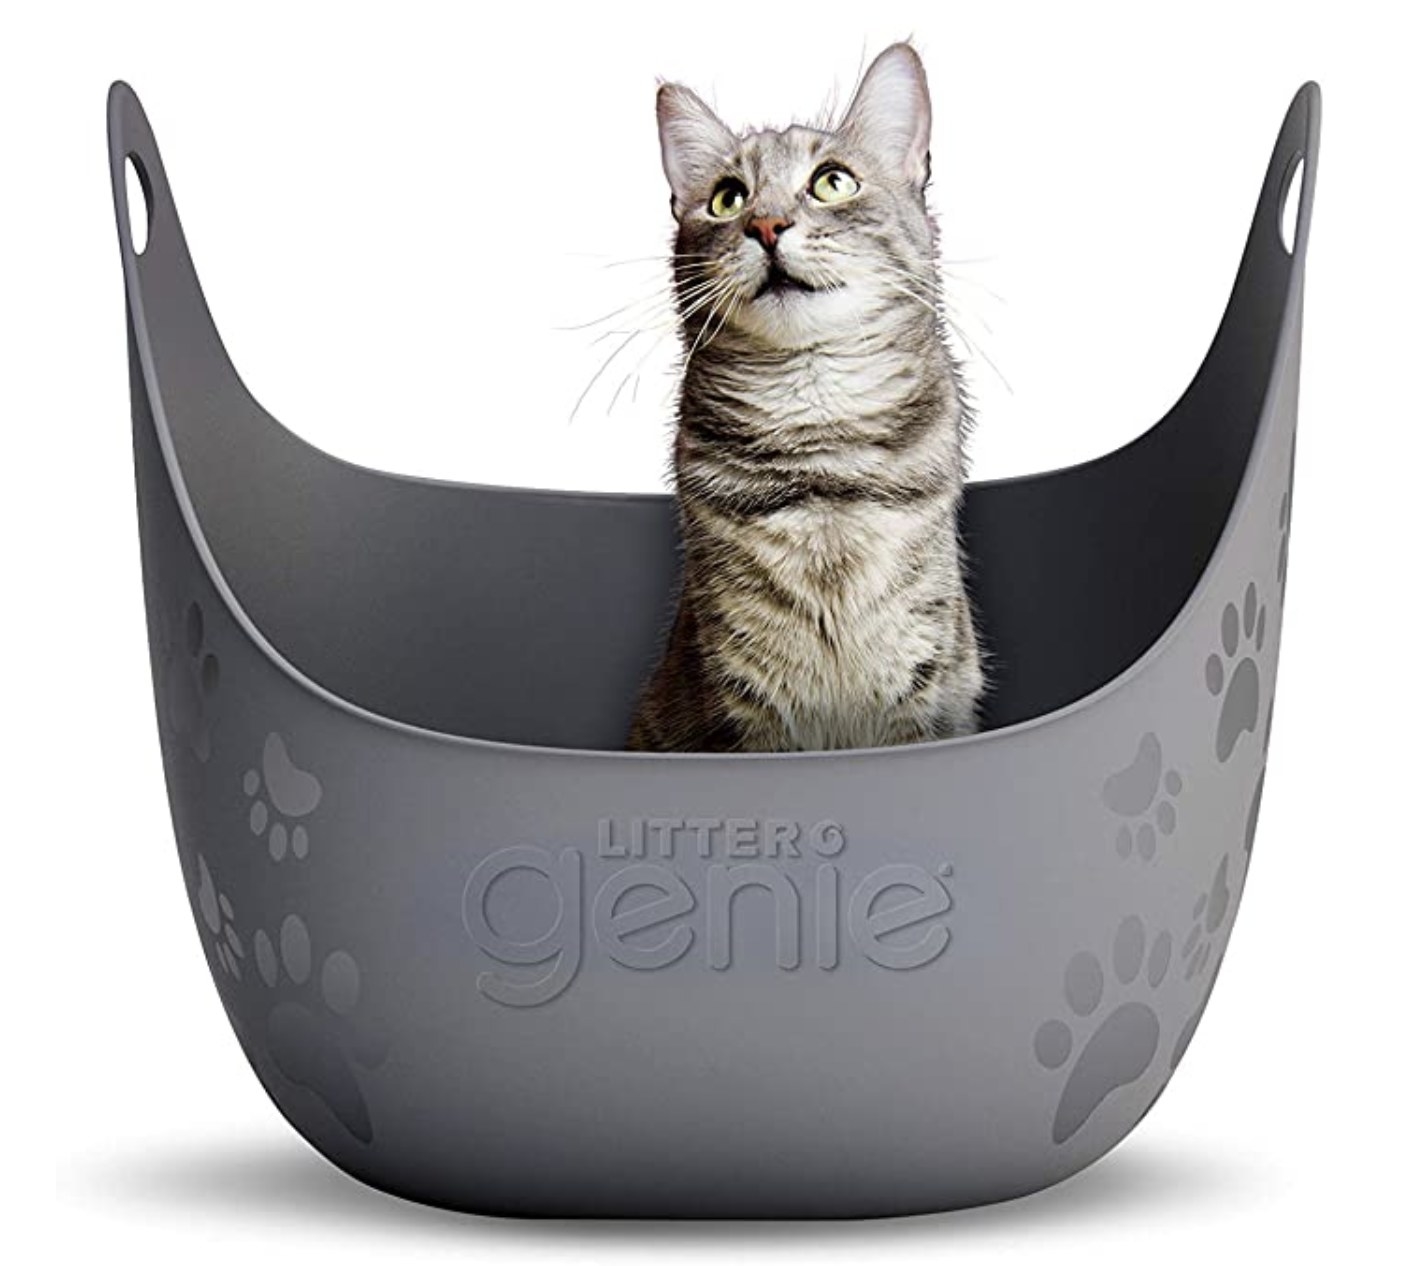 An image of a grey cat inside a litter box shaped like a bowl with flexible handles on each side. 